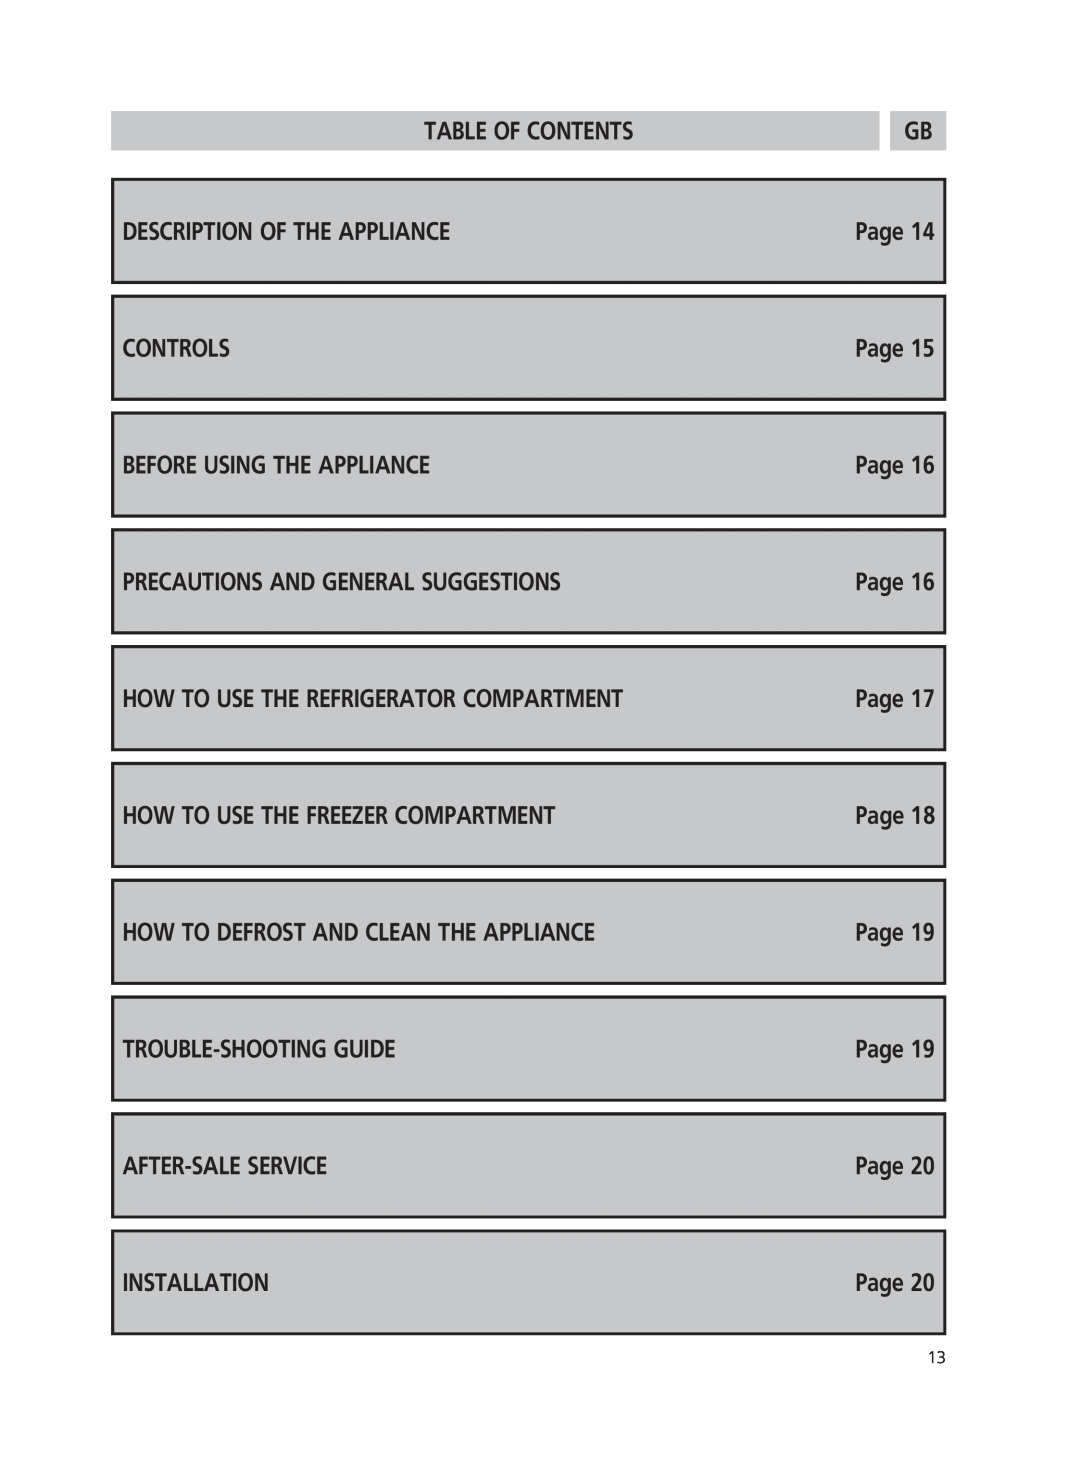 Smeg FR206AP Table Of Contents, Description Of The Appliance, Controls, Before Using The Appliance, Trouble-Shootingguide 